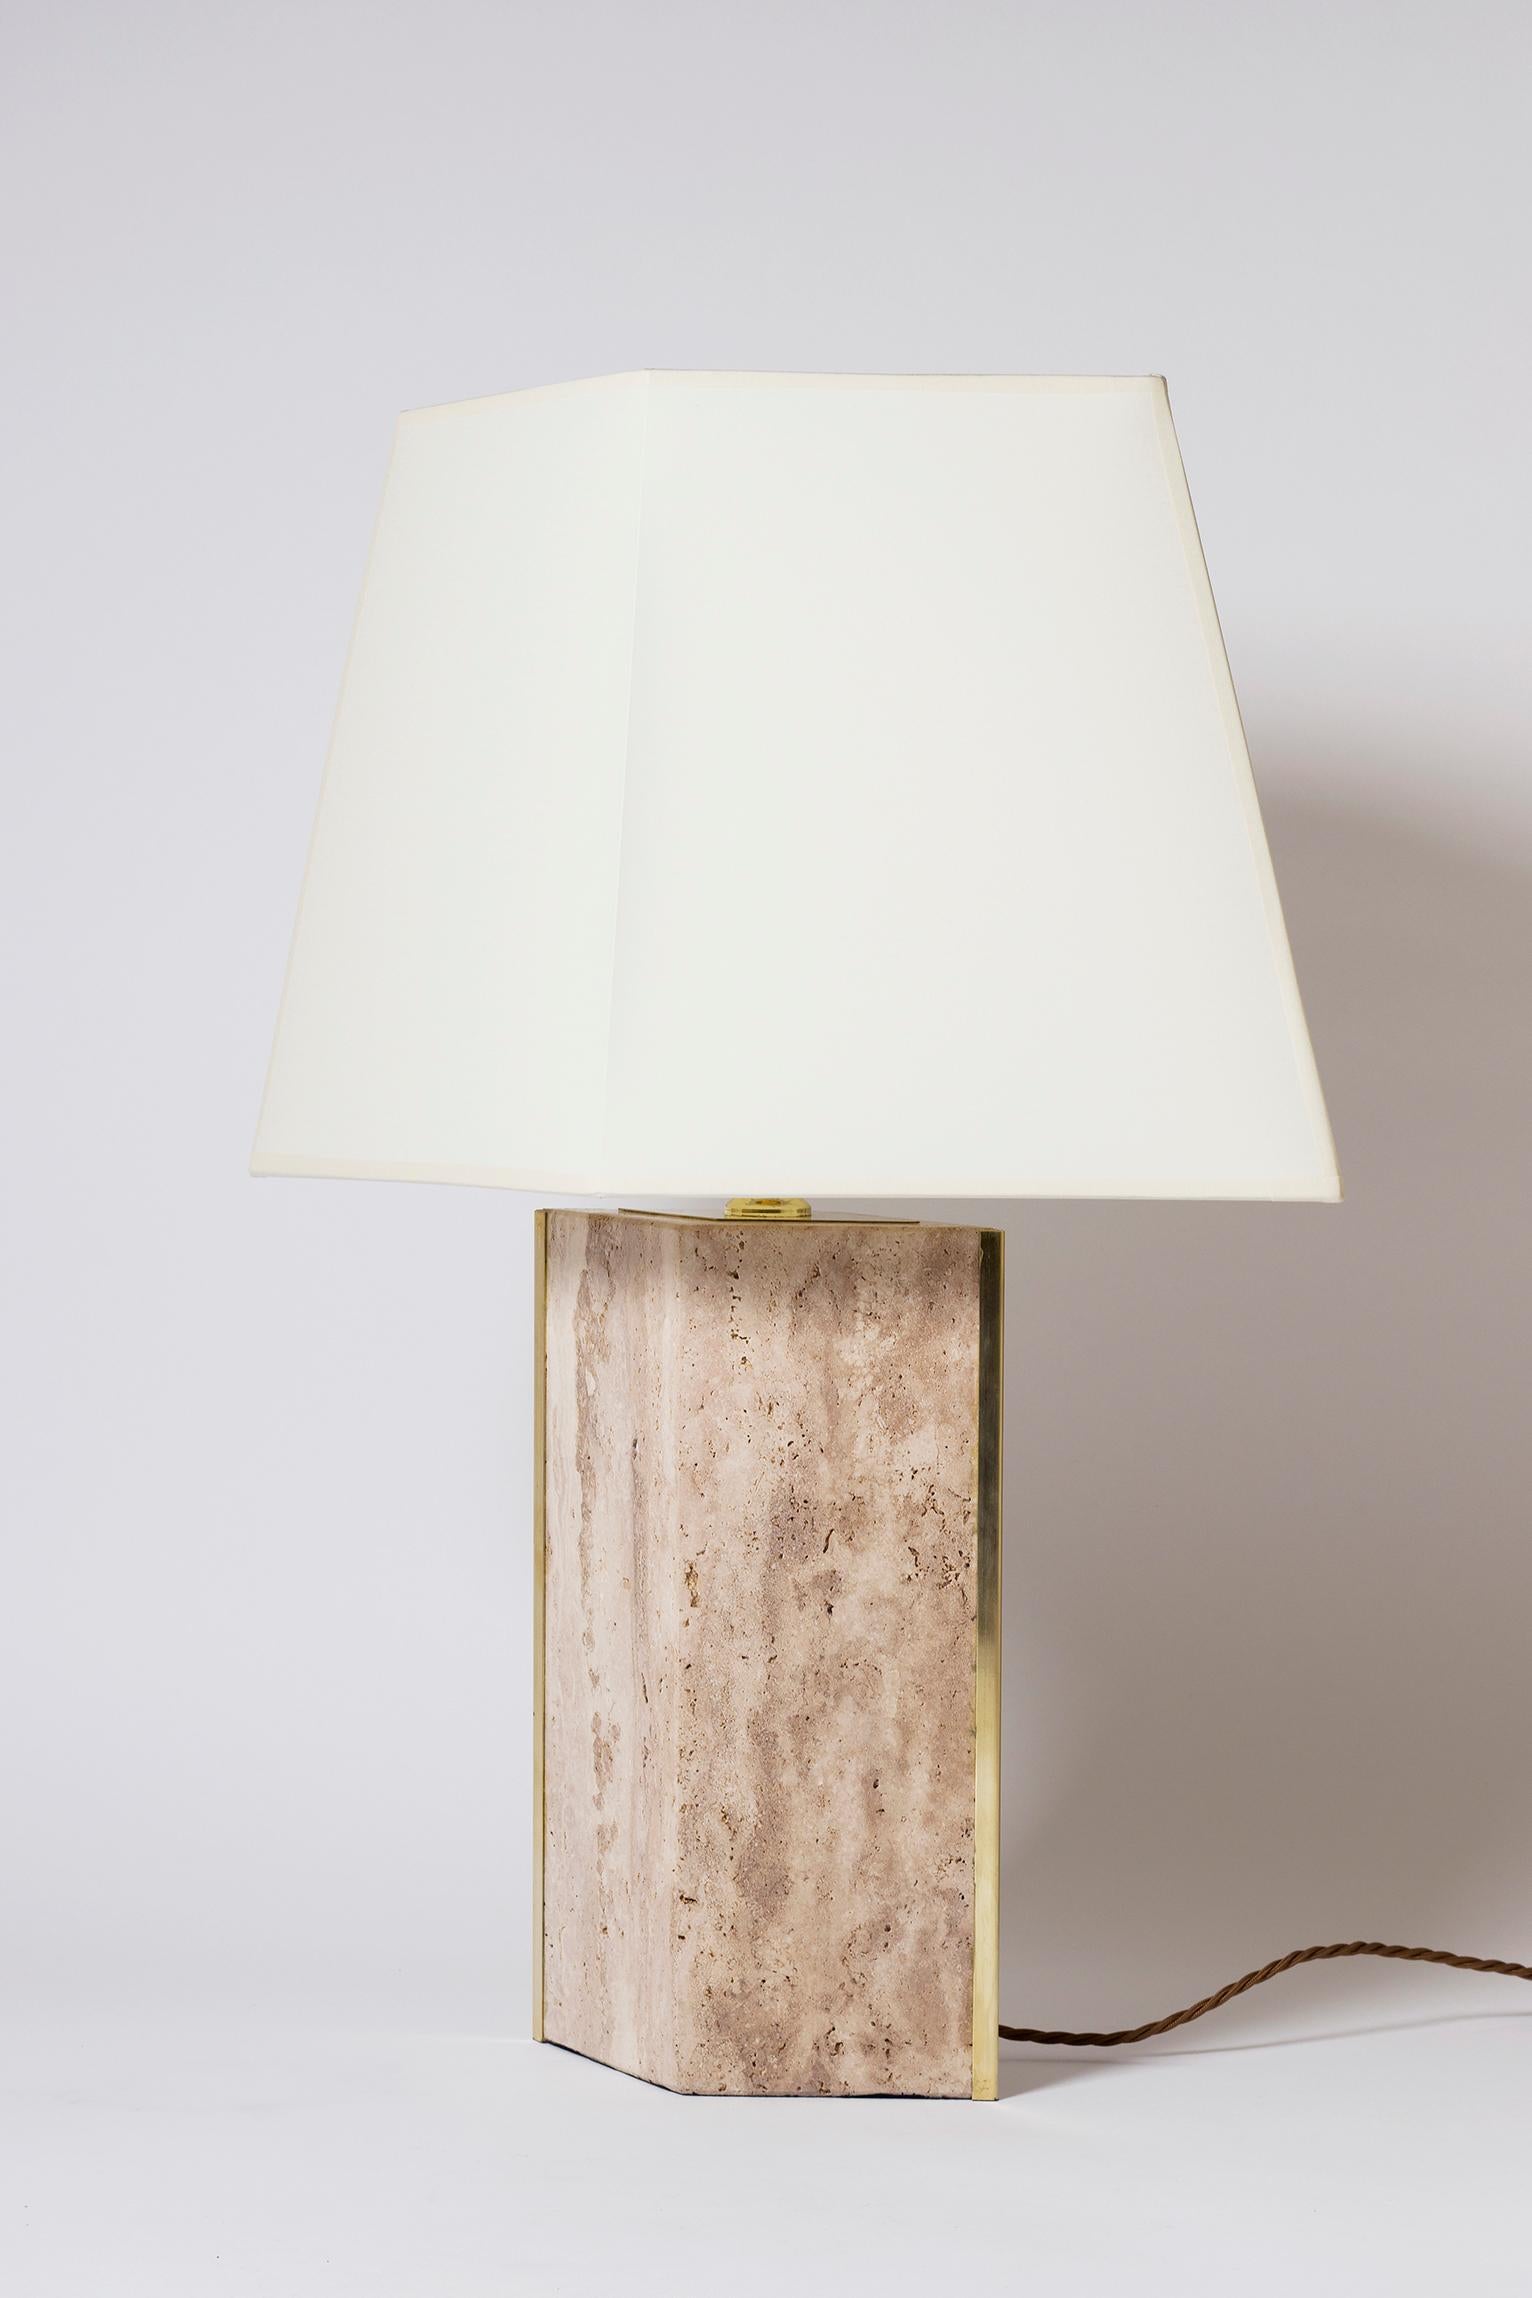 British The 'Marine' Travertine and Brass Table Lamp, by Dorian Caffot de Fawes